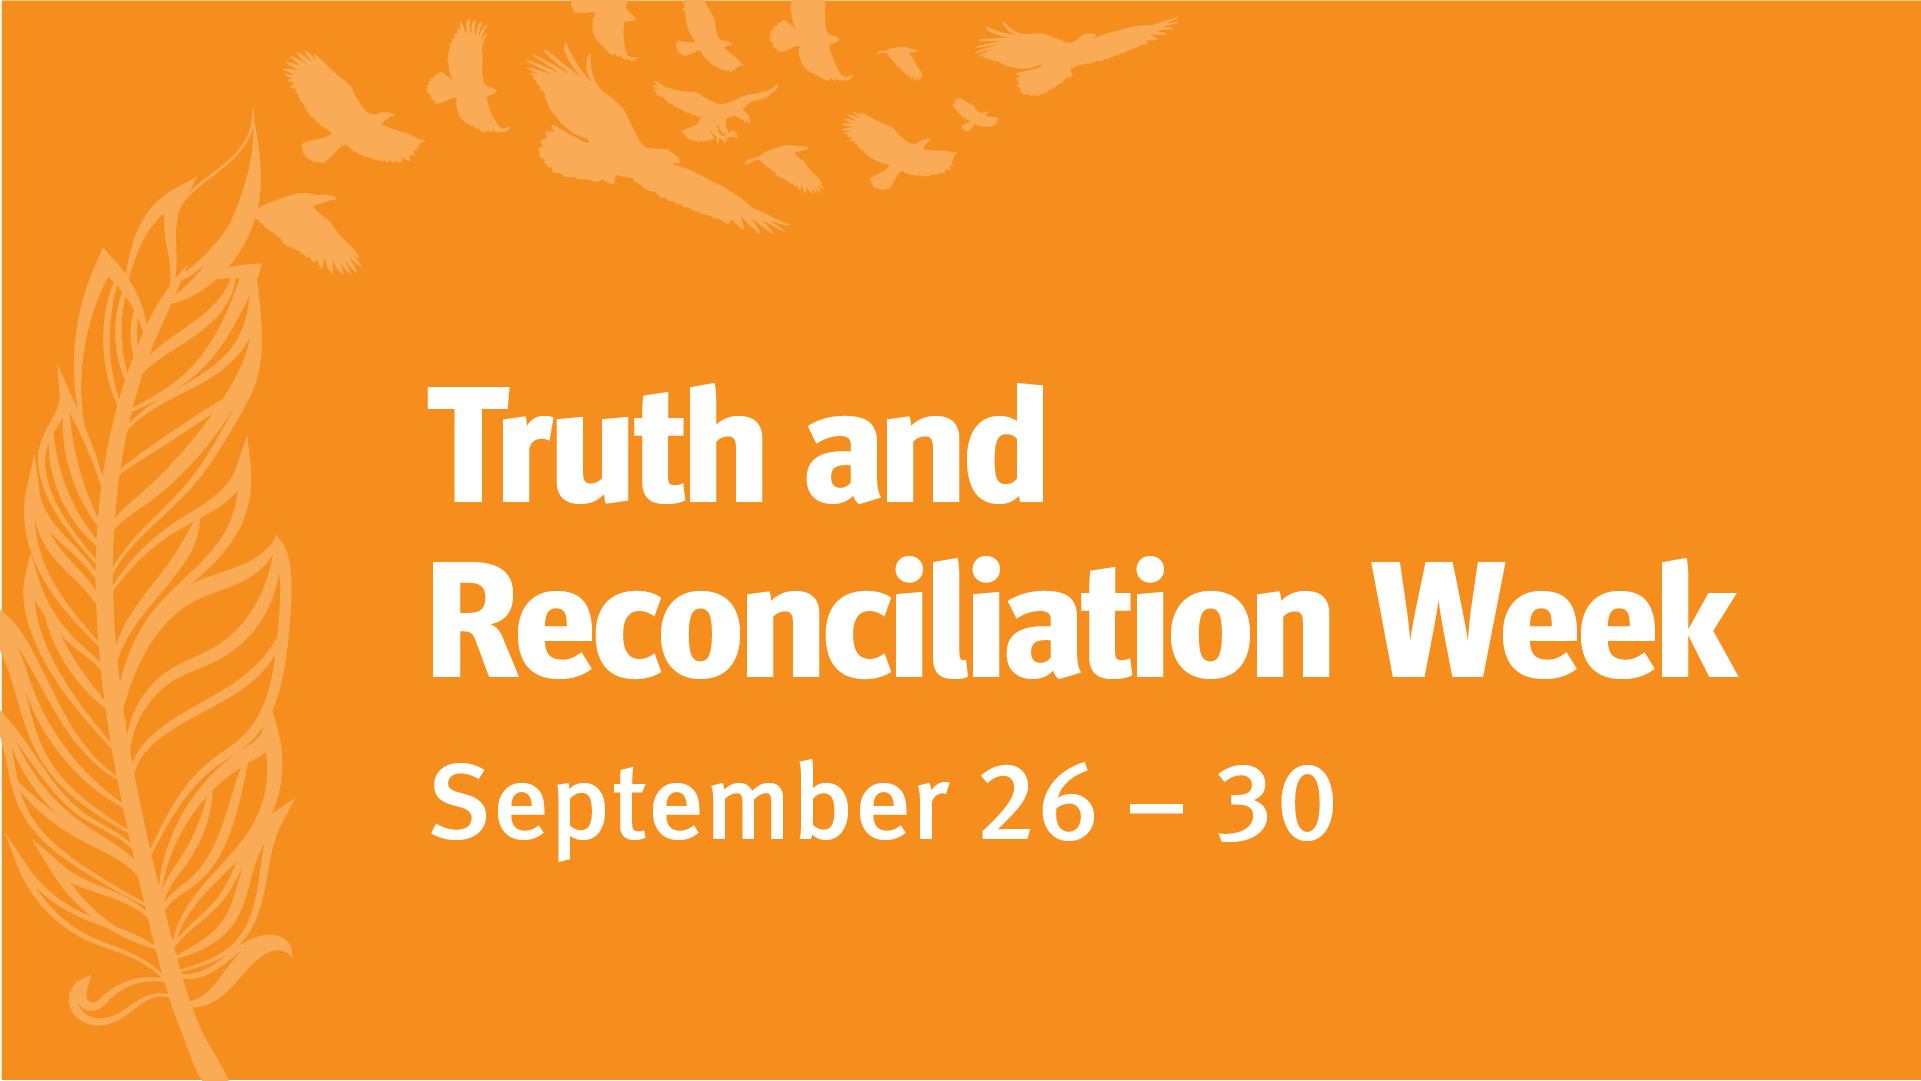 Truth and Reconciliation Week, September 26 – 30